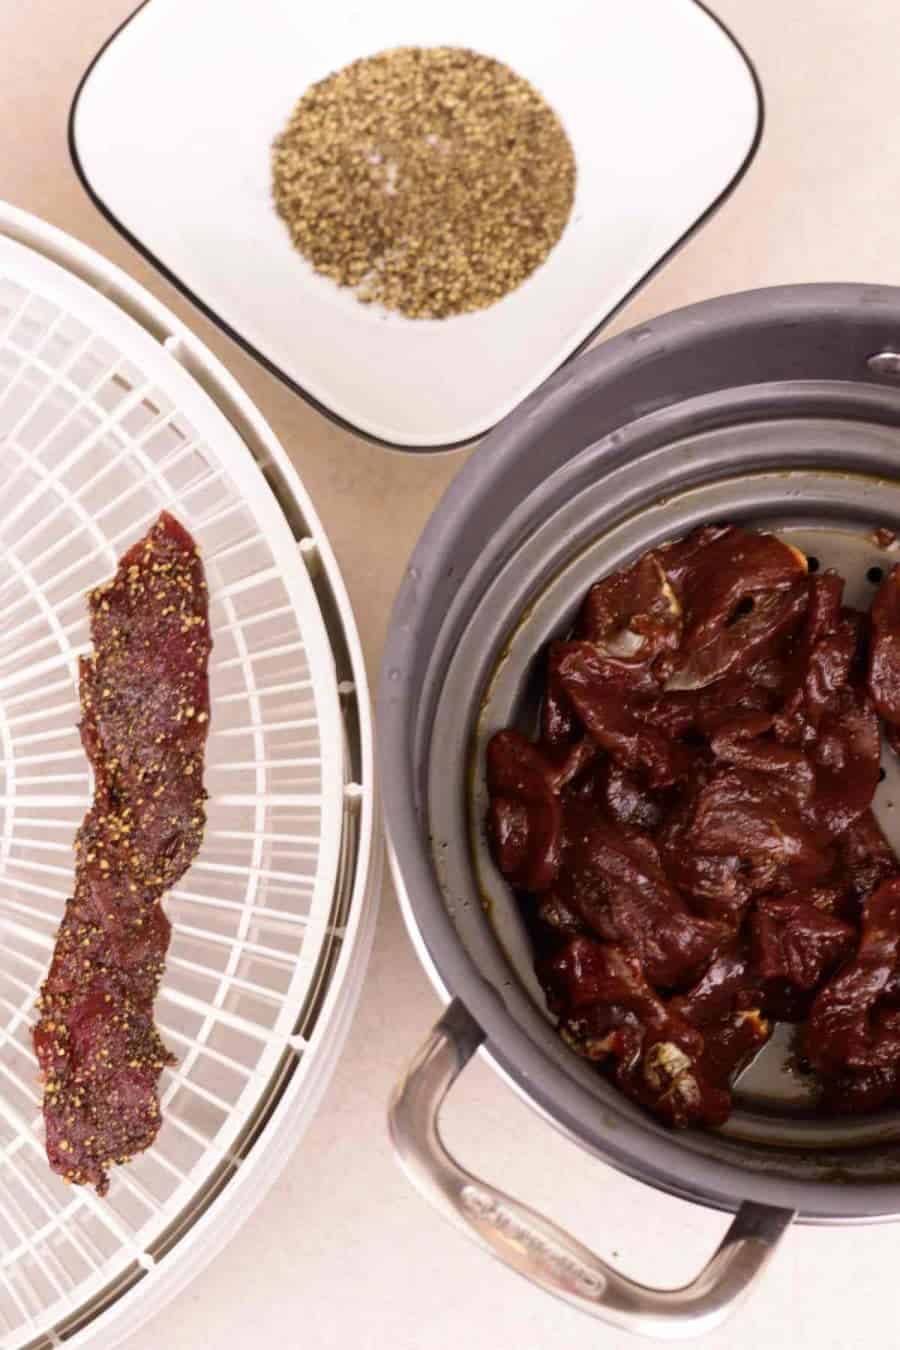 Peppered Venison in Colander & Tray